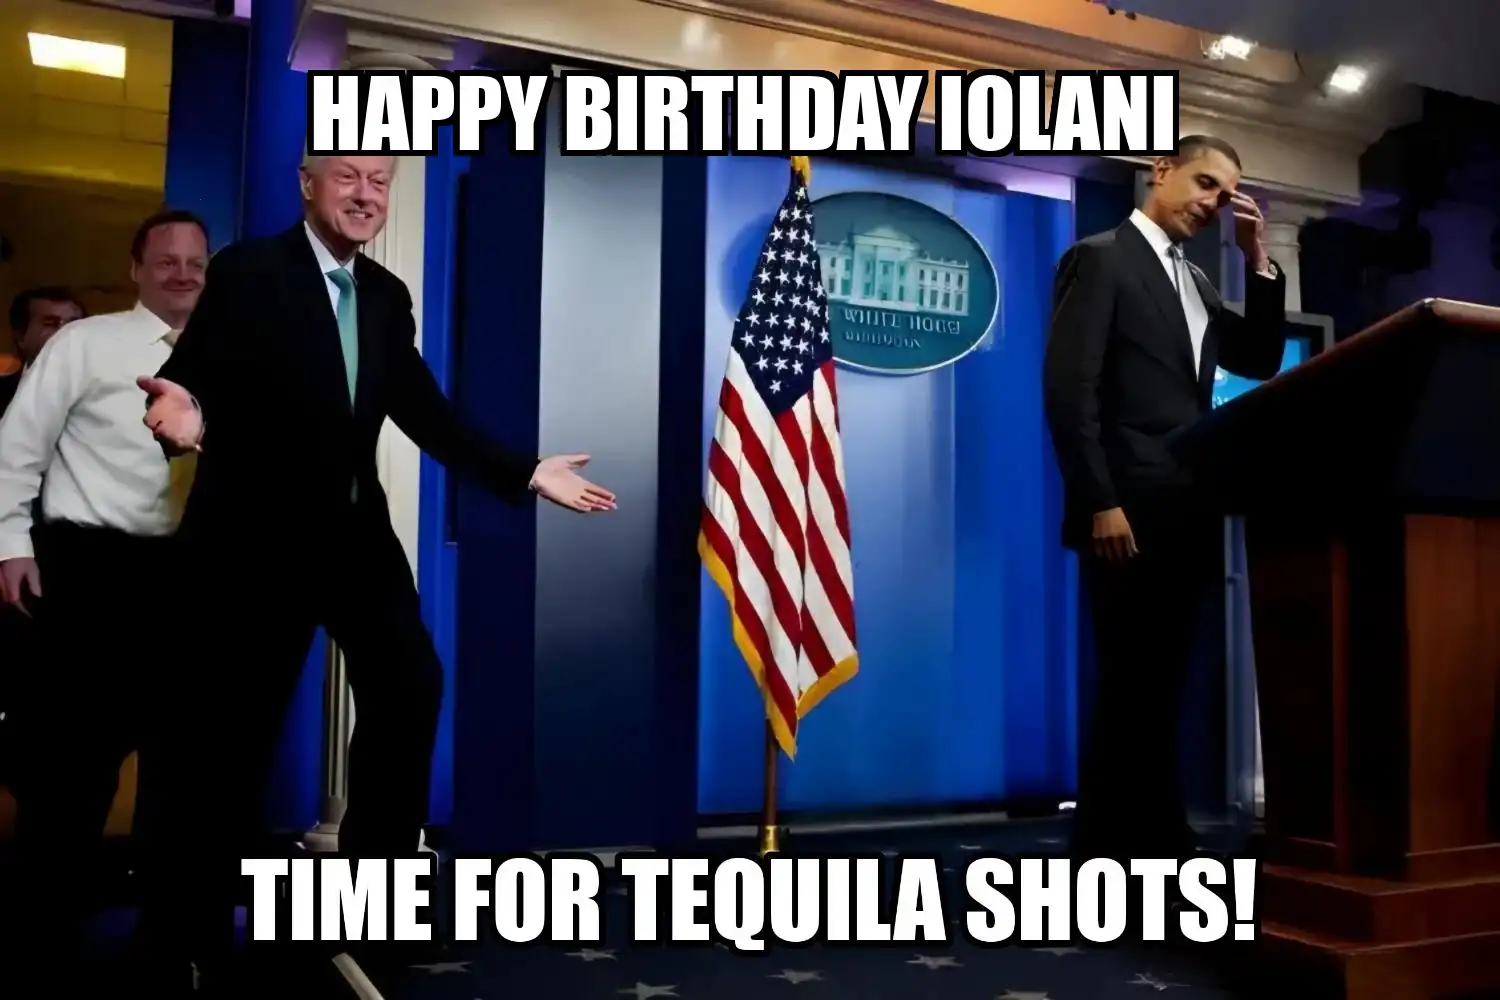 Happy Birthday Iolani Time For Tequila Shots Memes